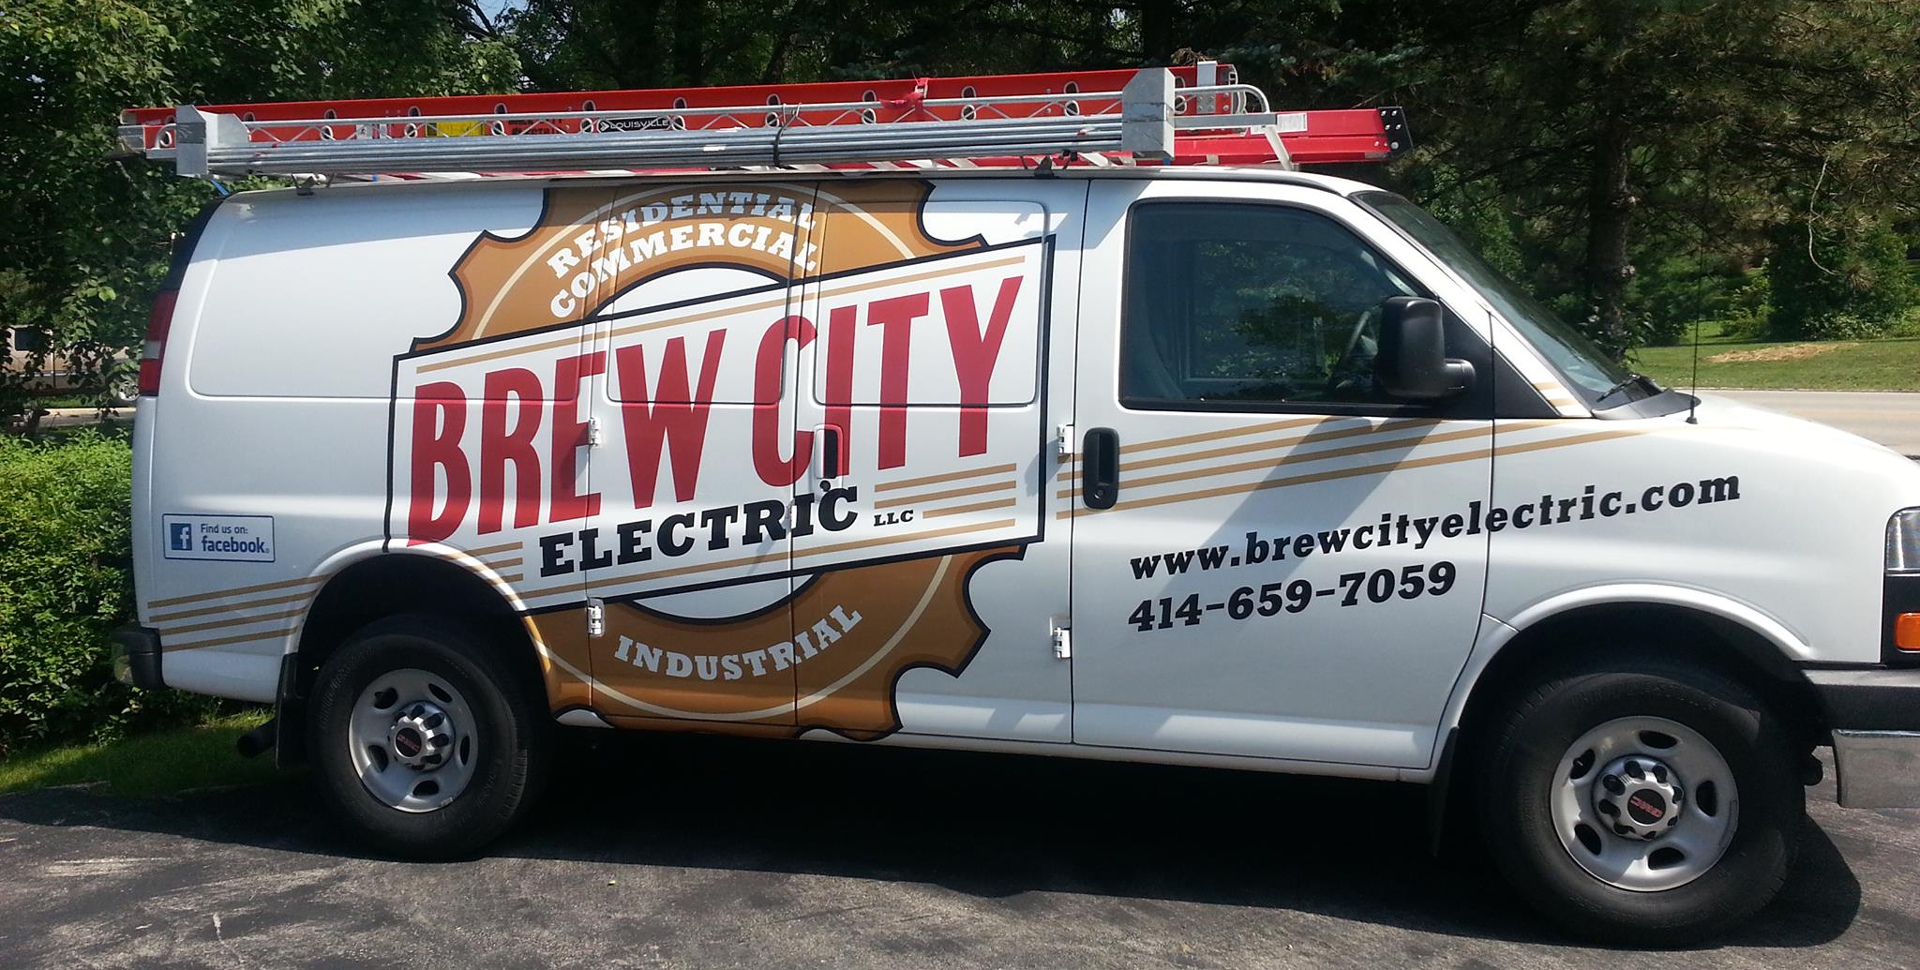 BREW CITY ELECTRIC, LLC. SOUTHEAST WISCONSIN ELECTRICAL CONTRACTOR